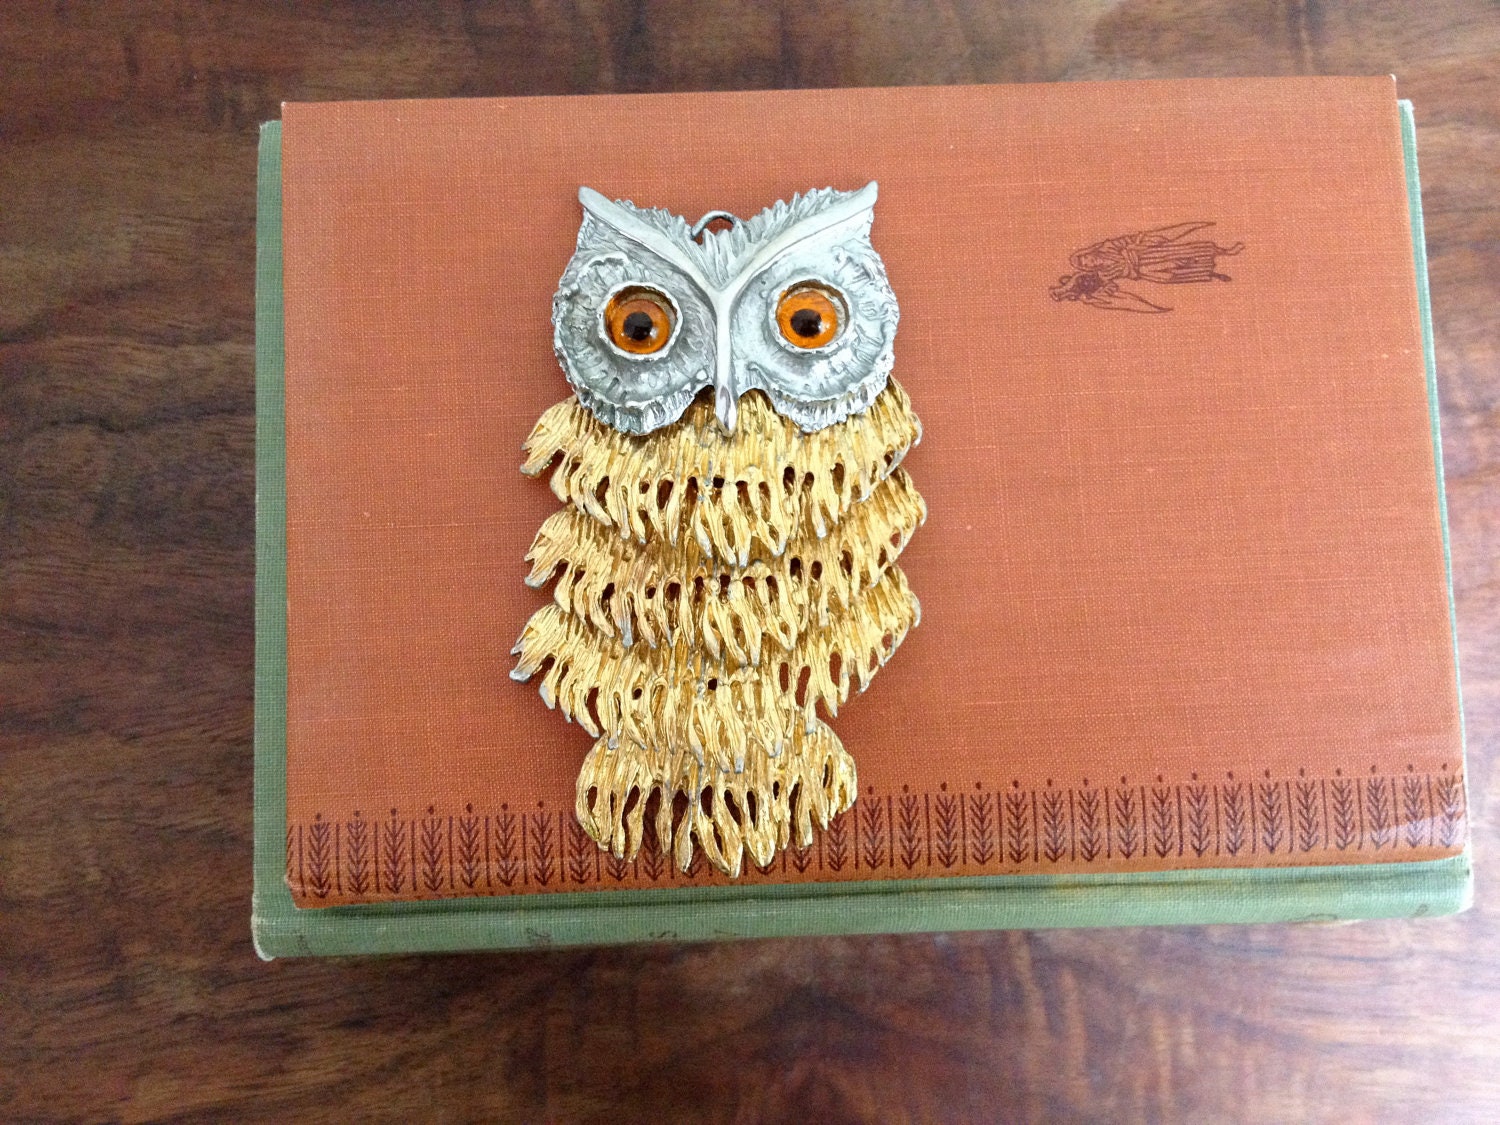 Vintage Articulated Owl Pendant - 1970s